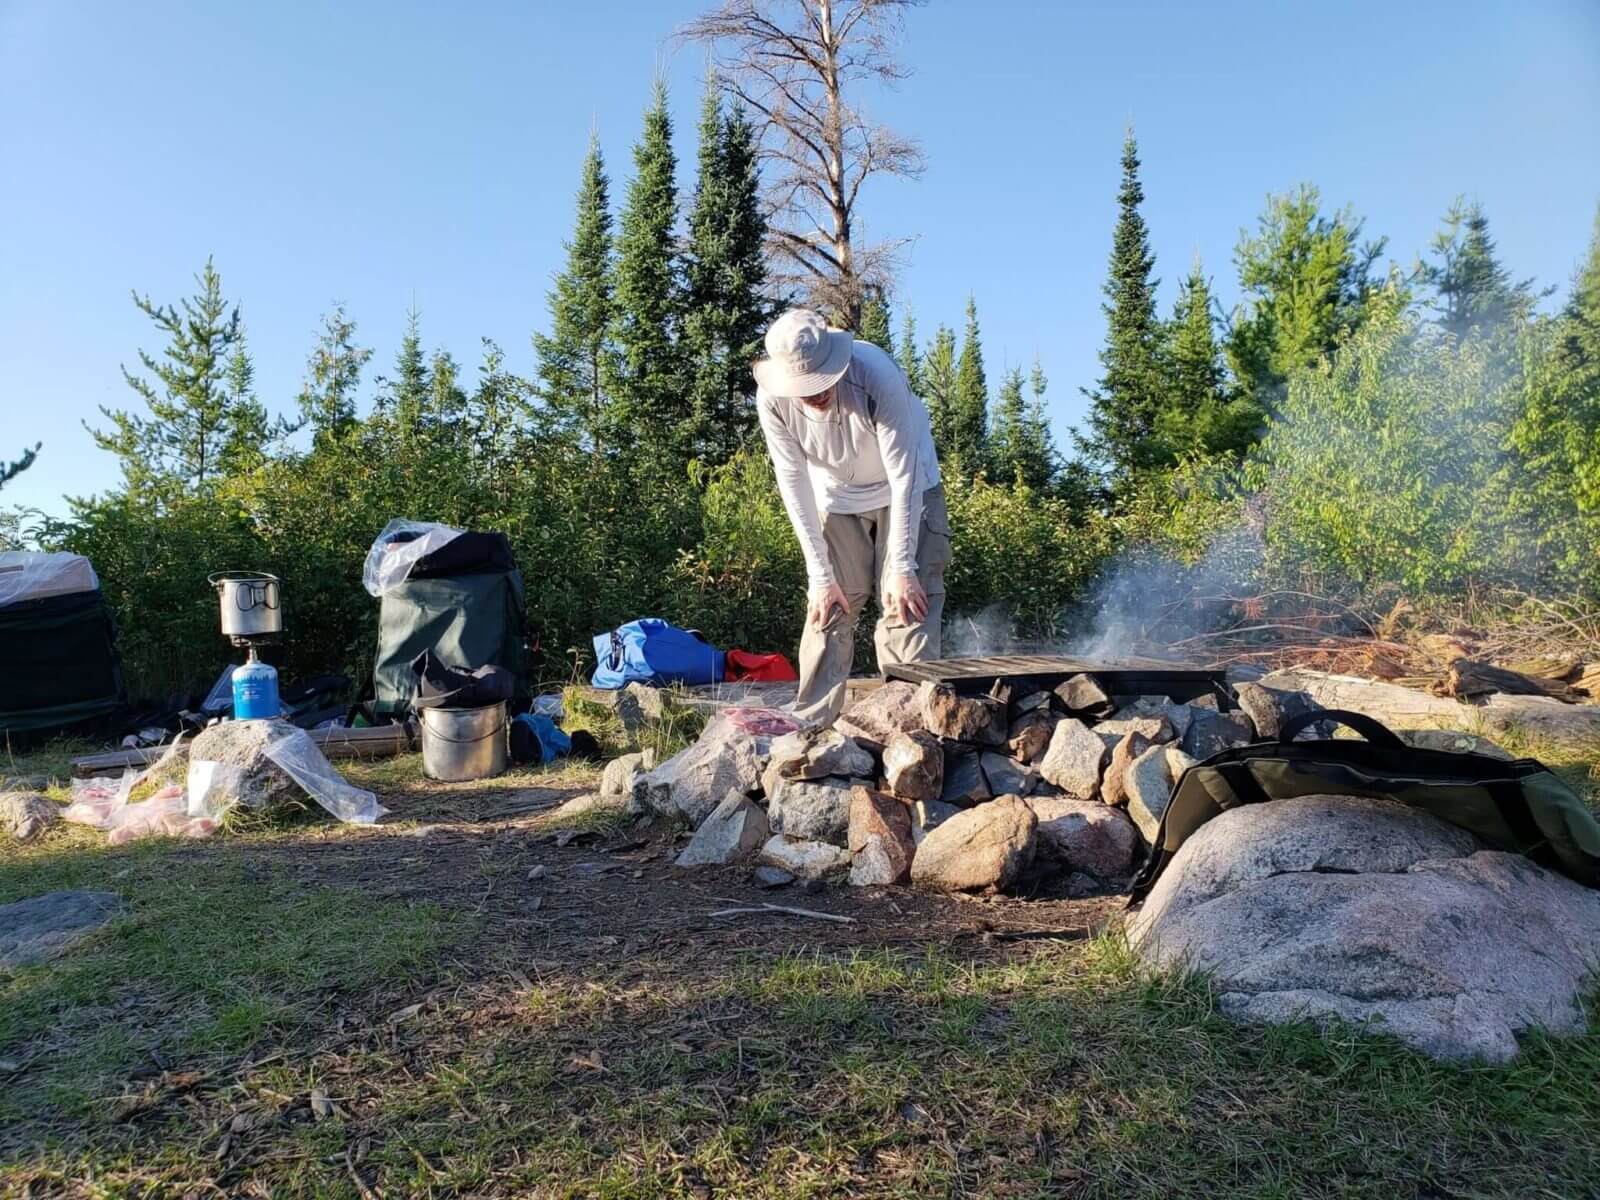 Person, Human, camping, Meal, Food